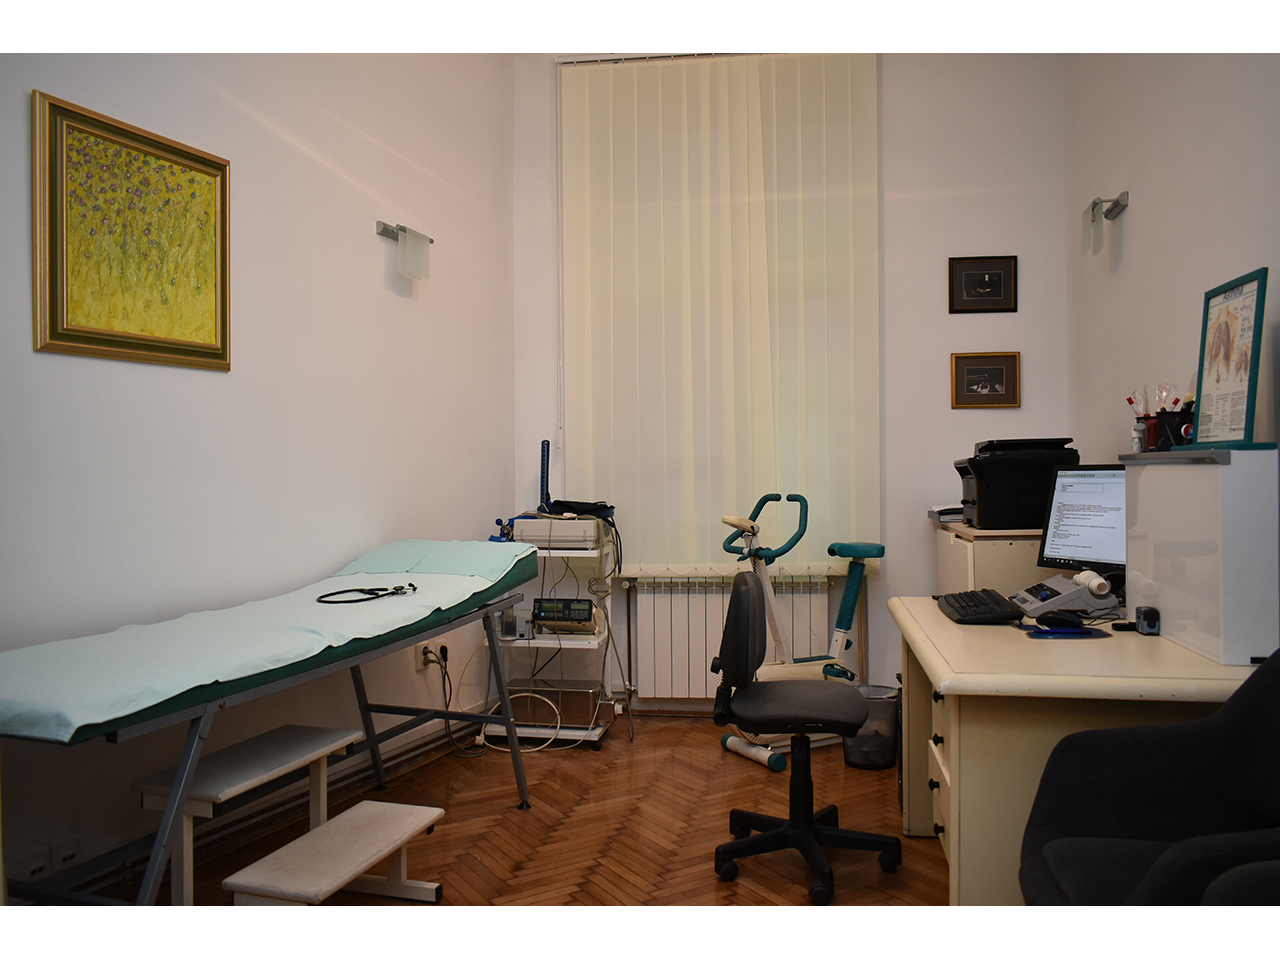 PLAVEC MEDICAL OFFICE FOR LUNG DISEASE Doctor Beograd